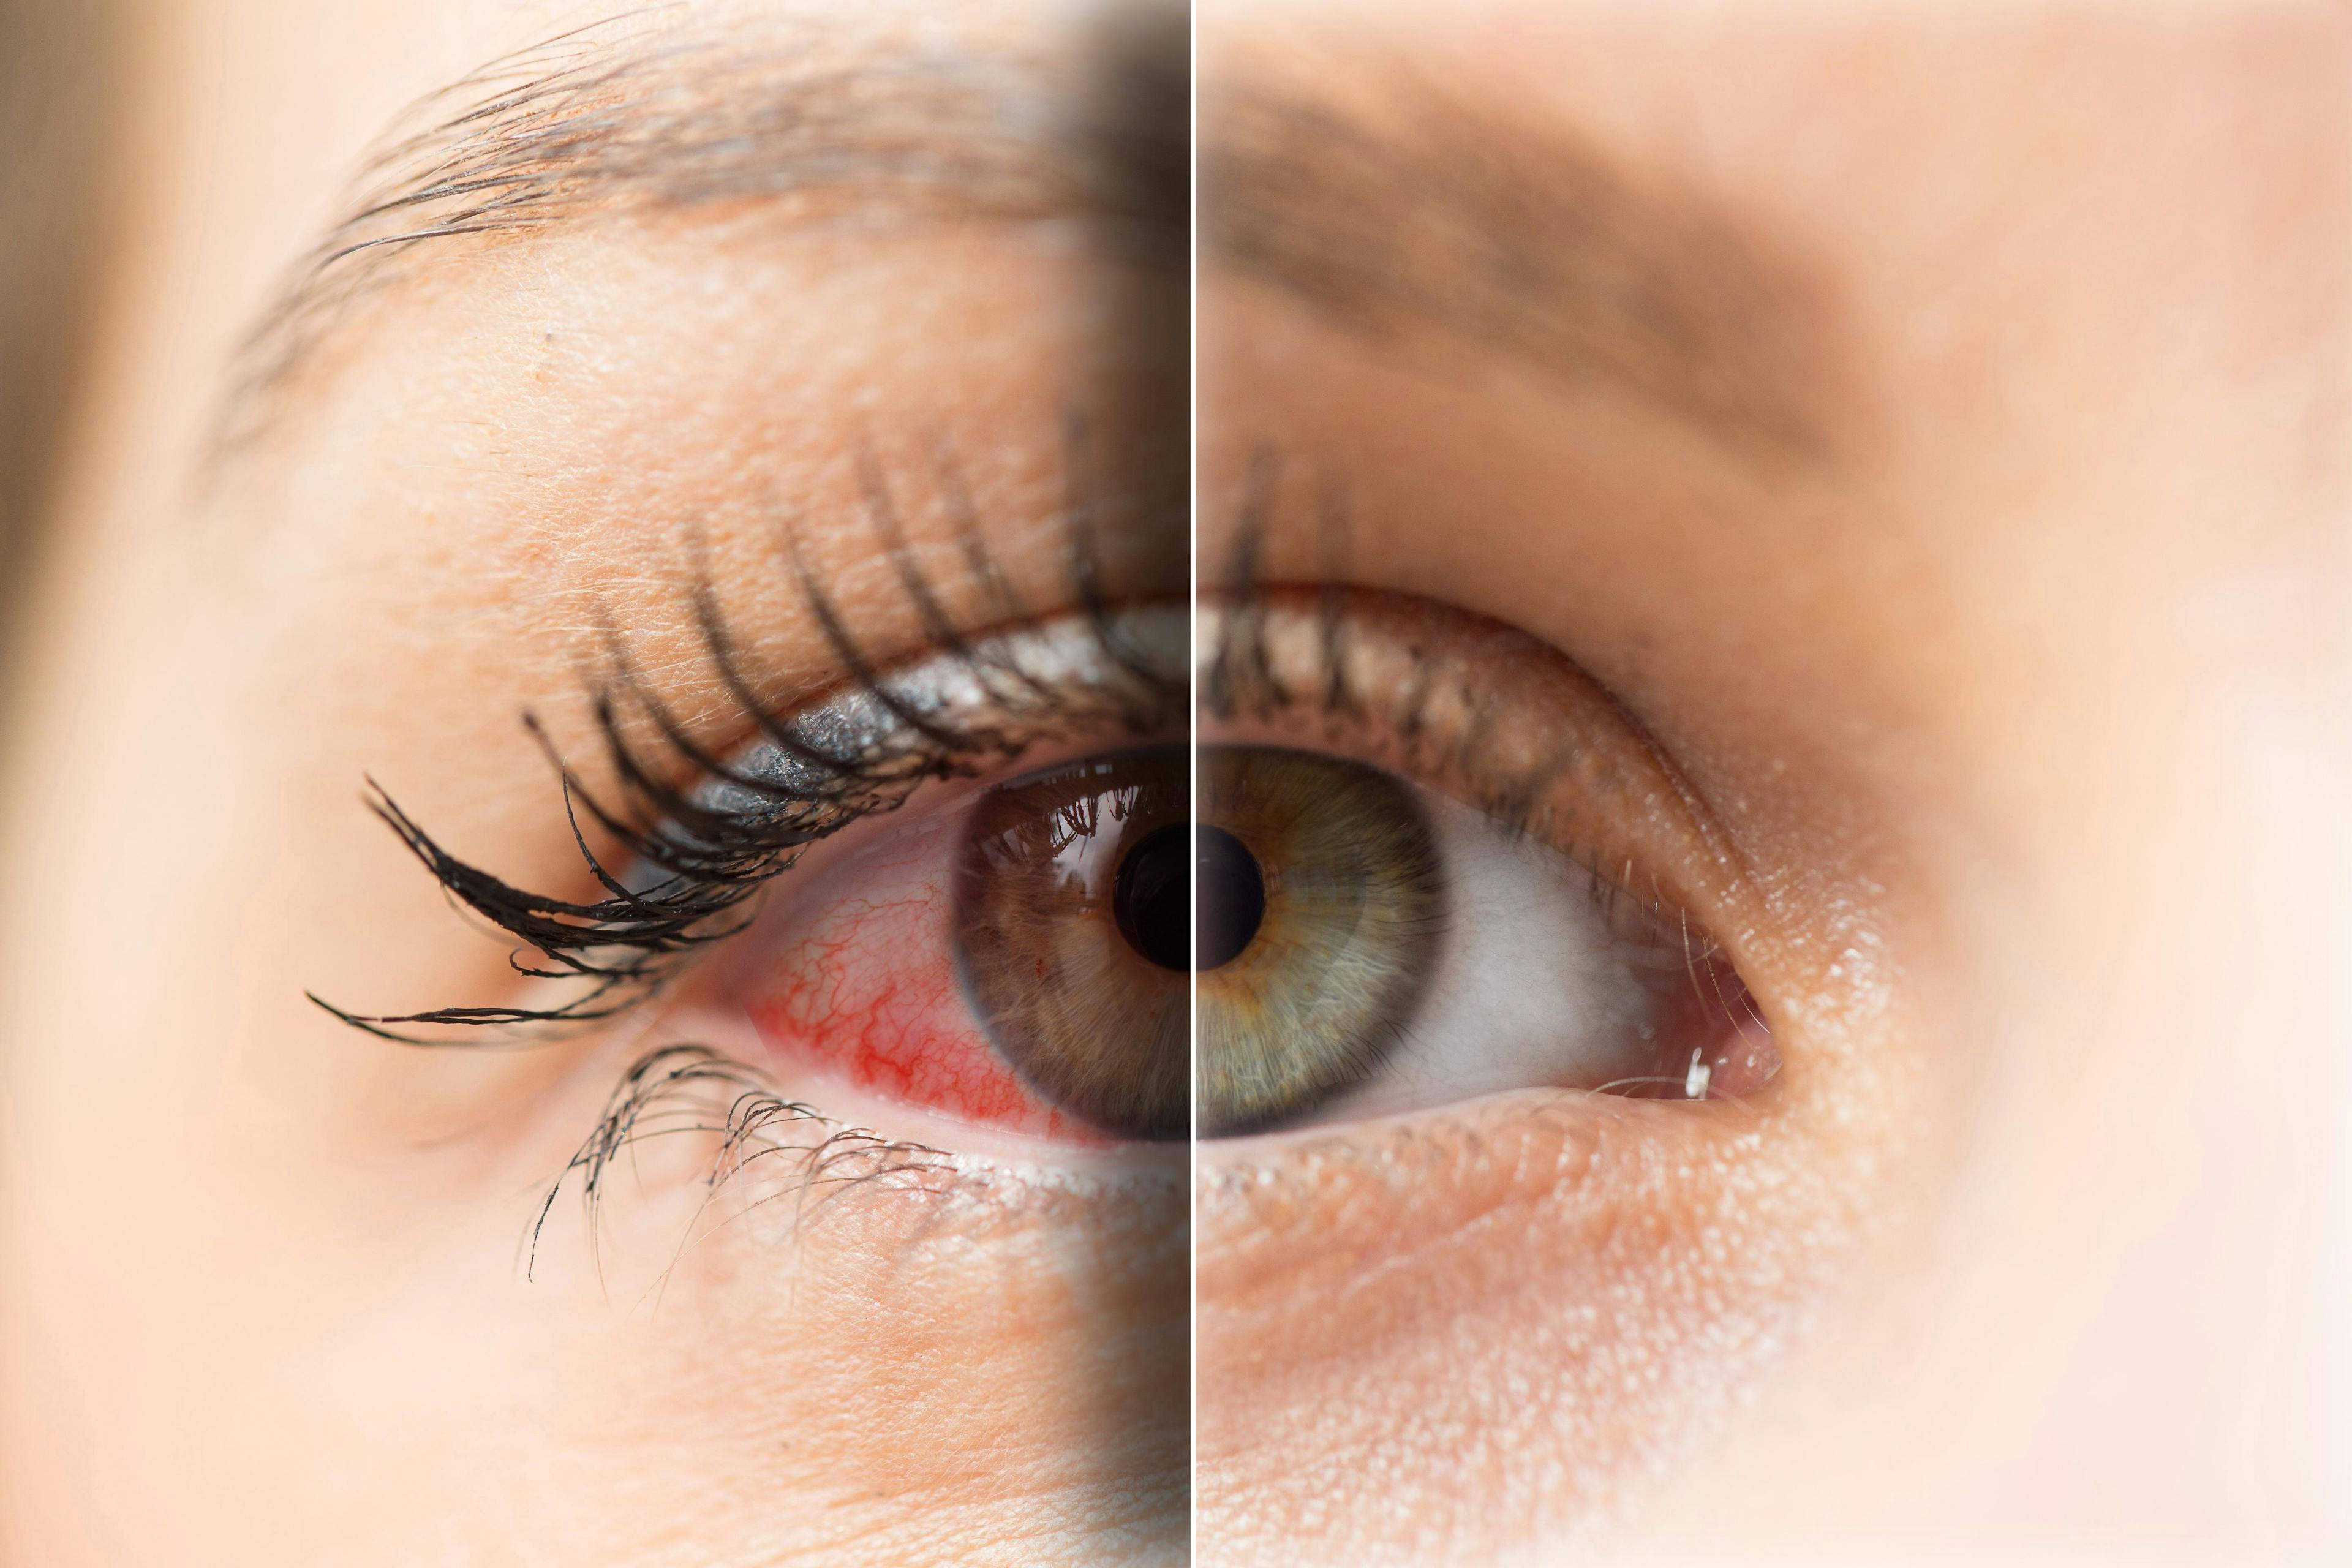 photo of woman's inflamed eye compared to her clear eye